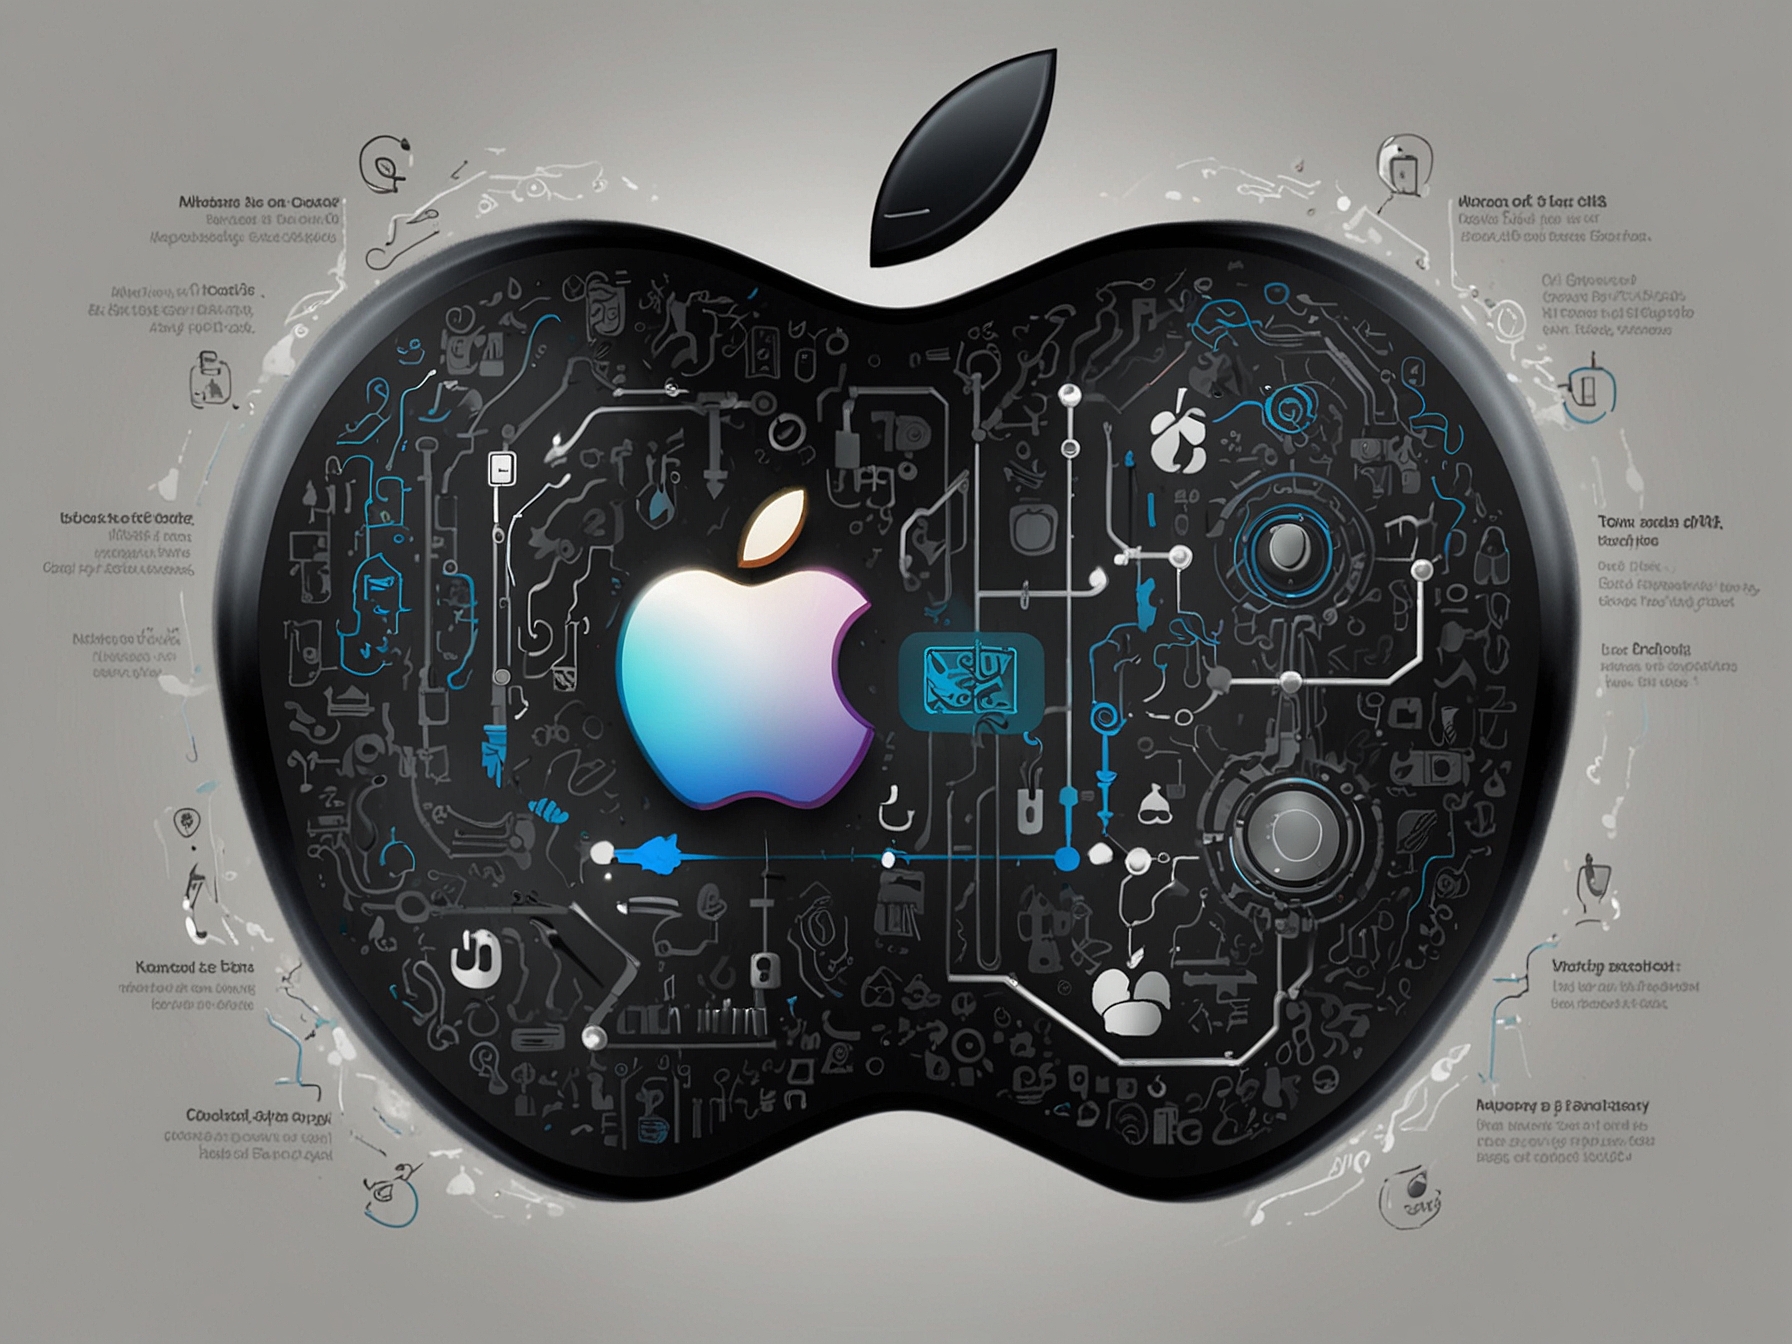 A graphic emphasizing Apple's AI and privacy features, with icons representing Siri, data security measures, and services like Apple Music, showcasing the company's commitment to user trust.